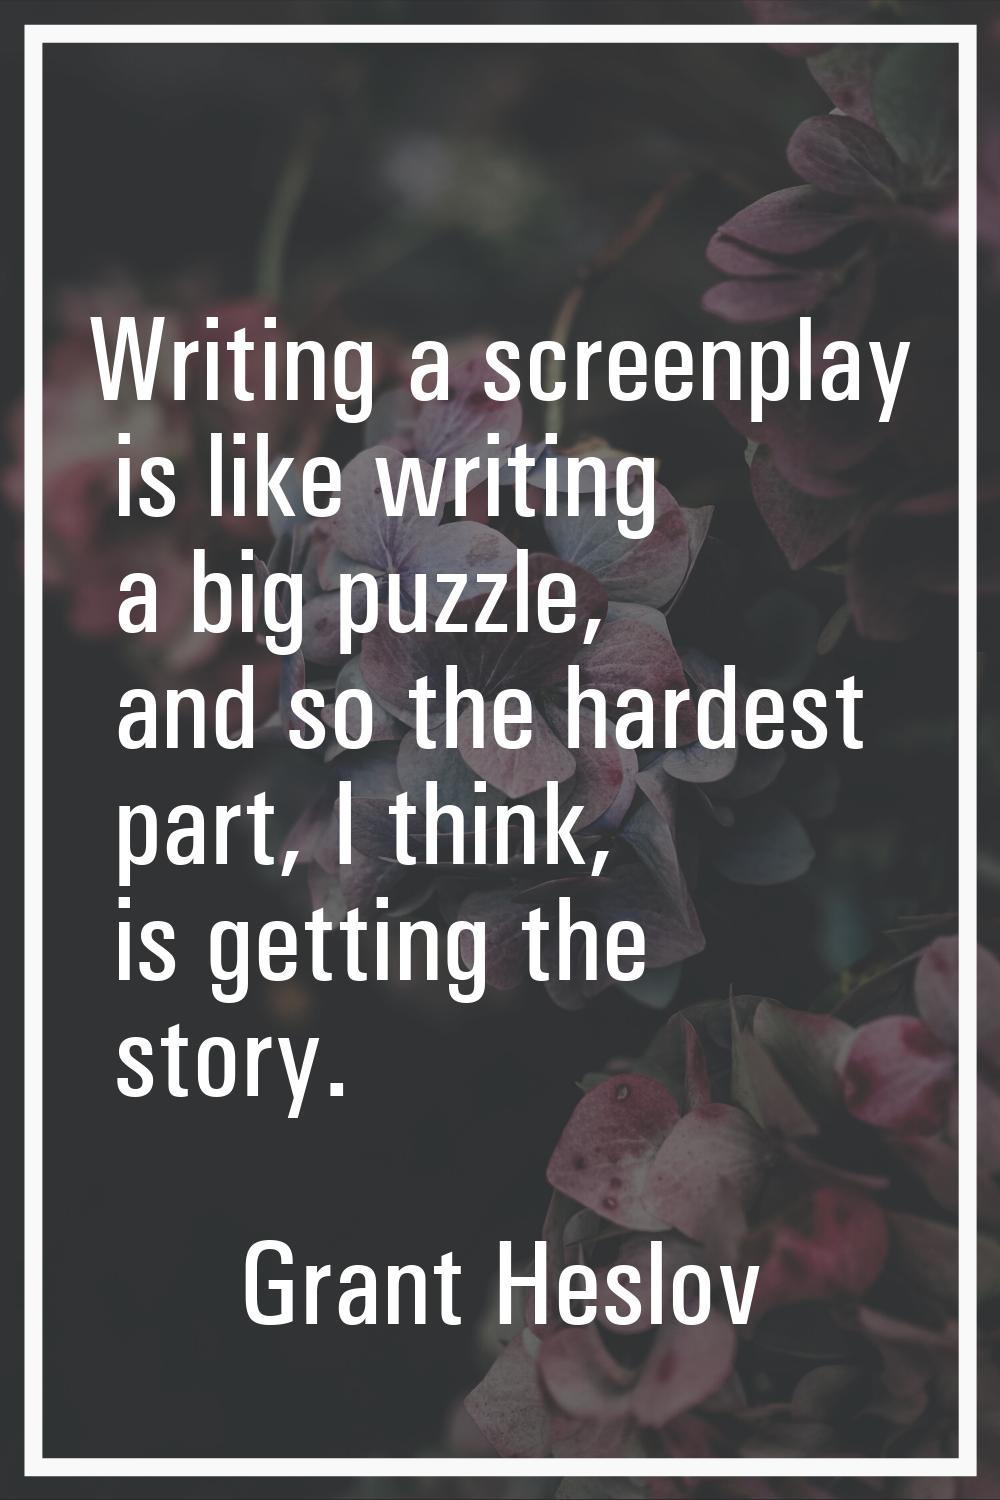 Writing a screenplay is like writing a big puzzle, and so the hardest part, I think, is getting the